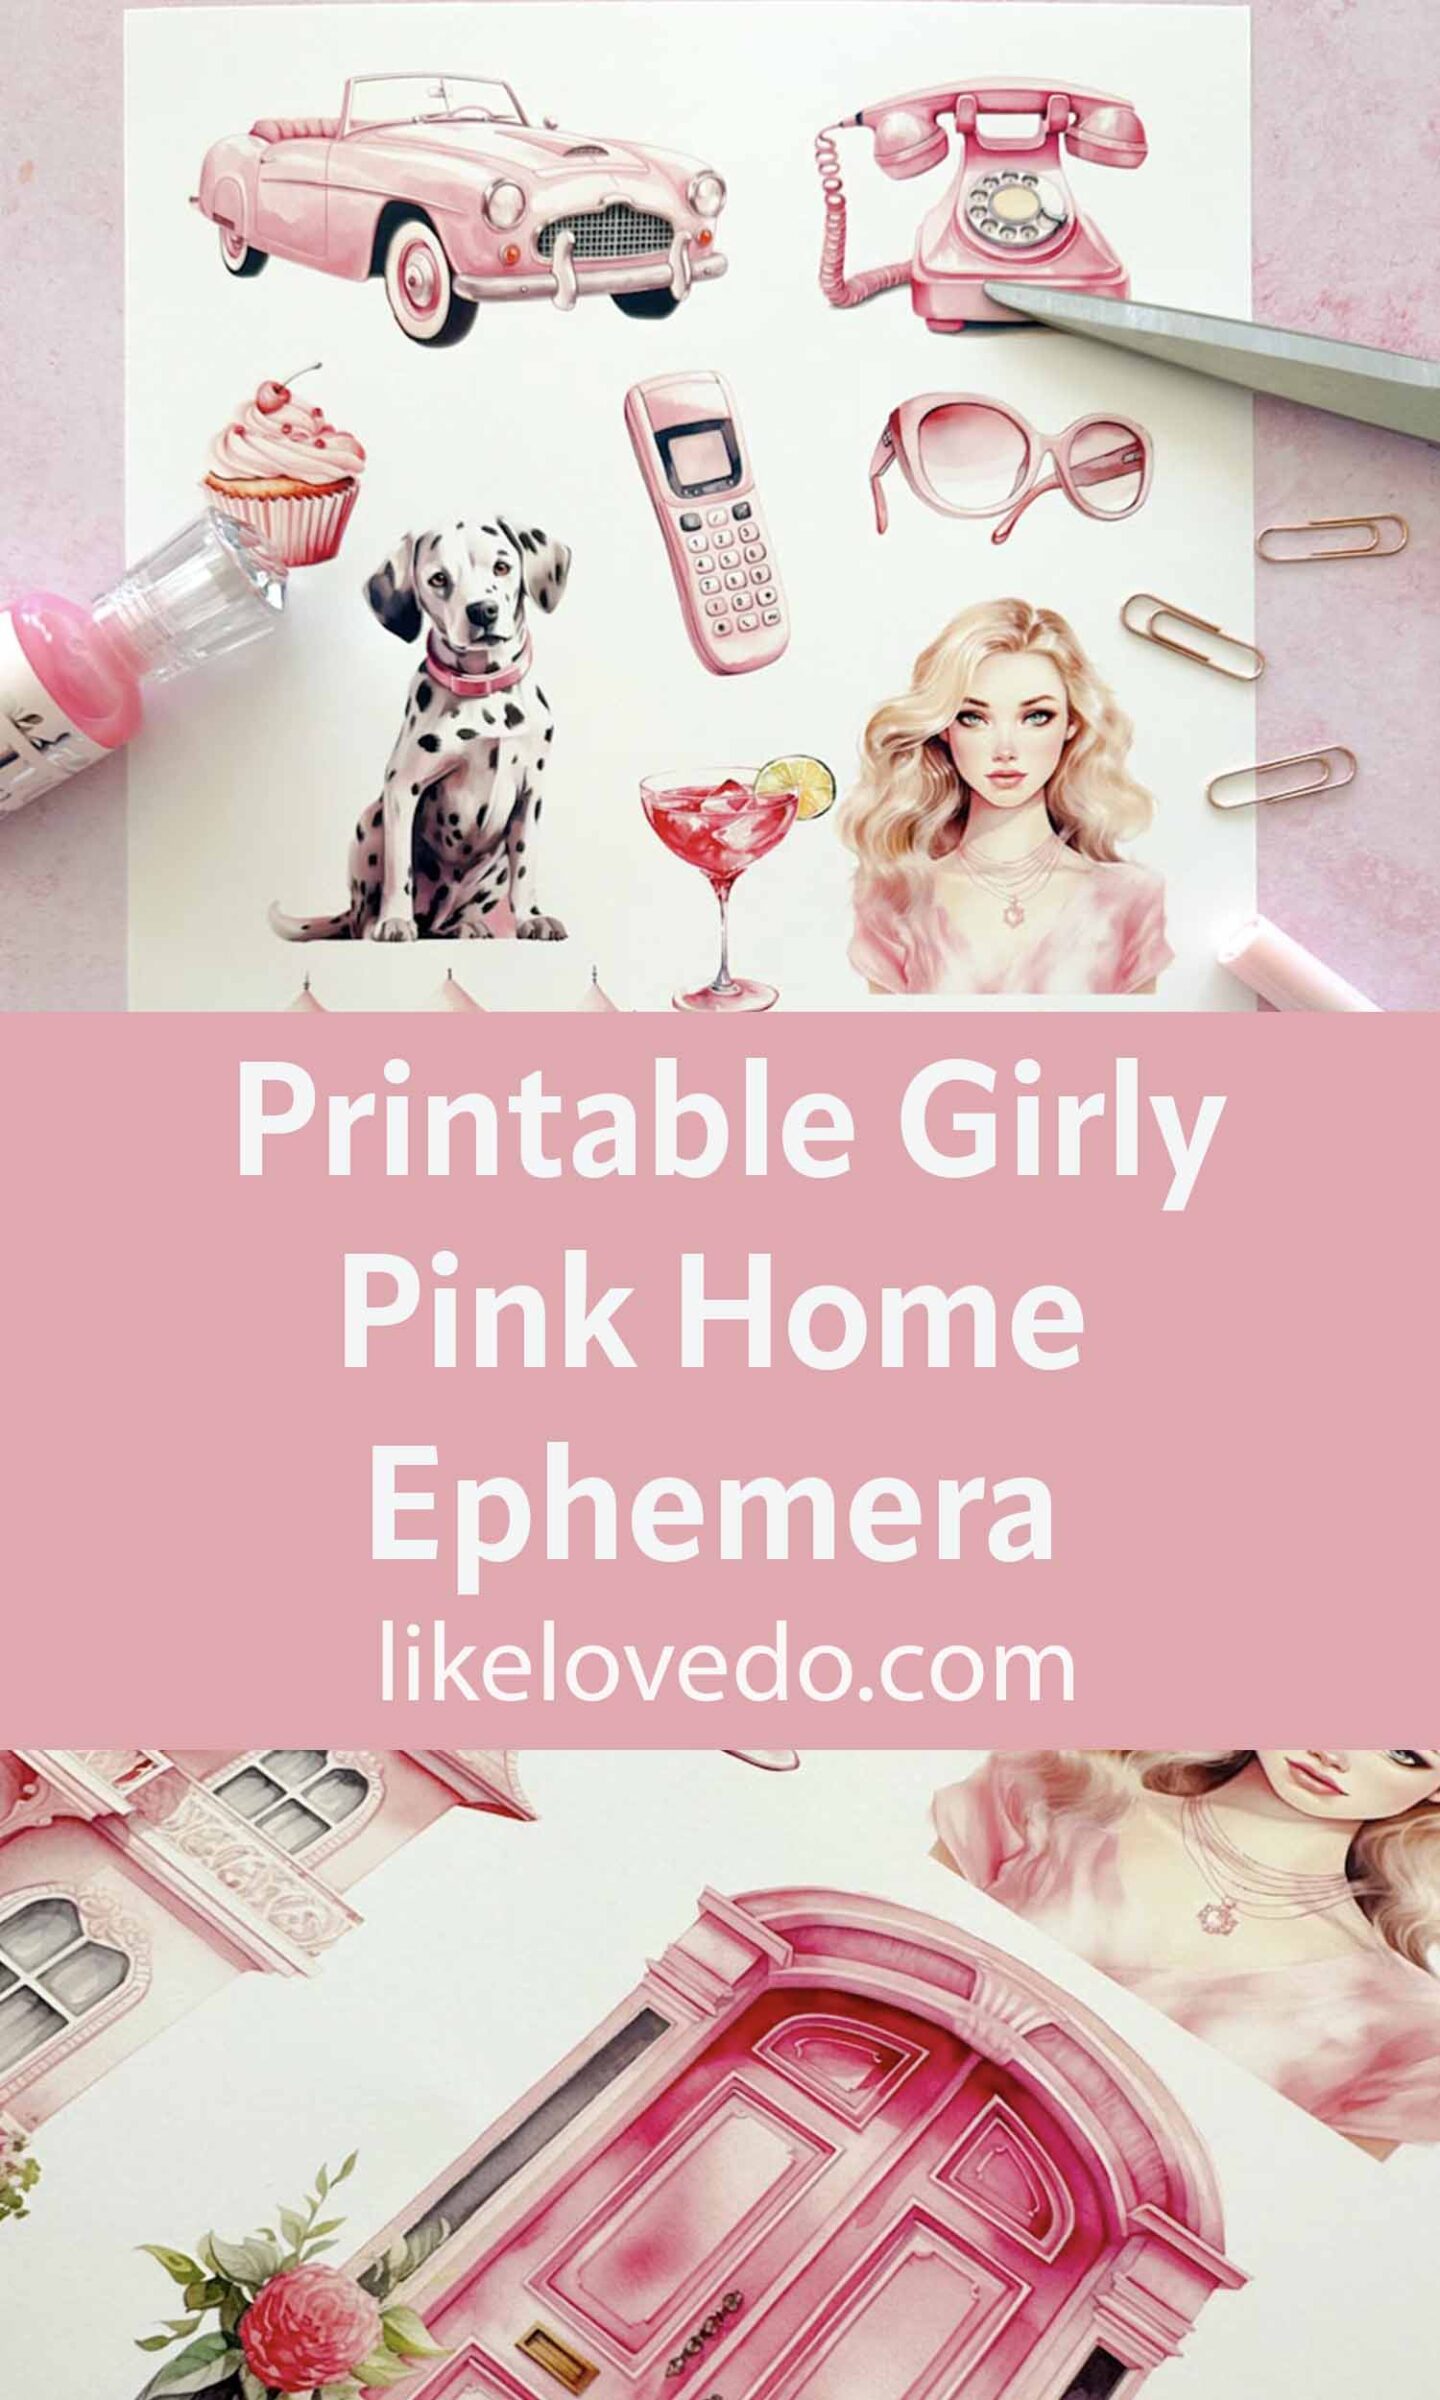 Printable girly clipart in pink home ephemera, cars, houses, cupcakes Barbie inspired